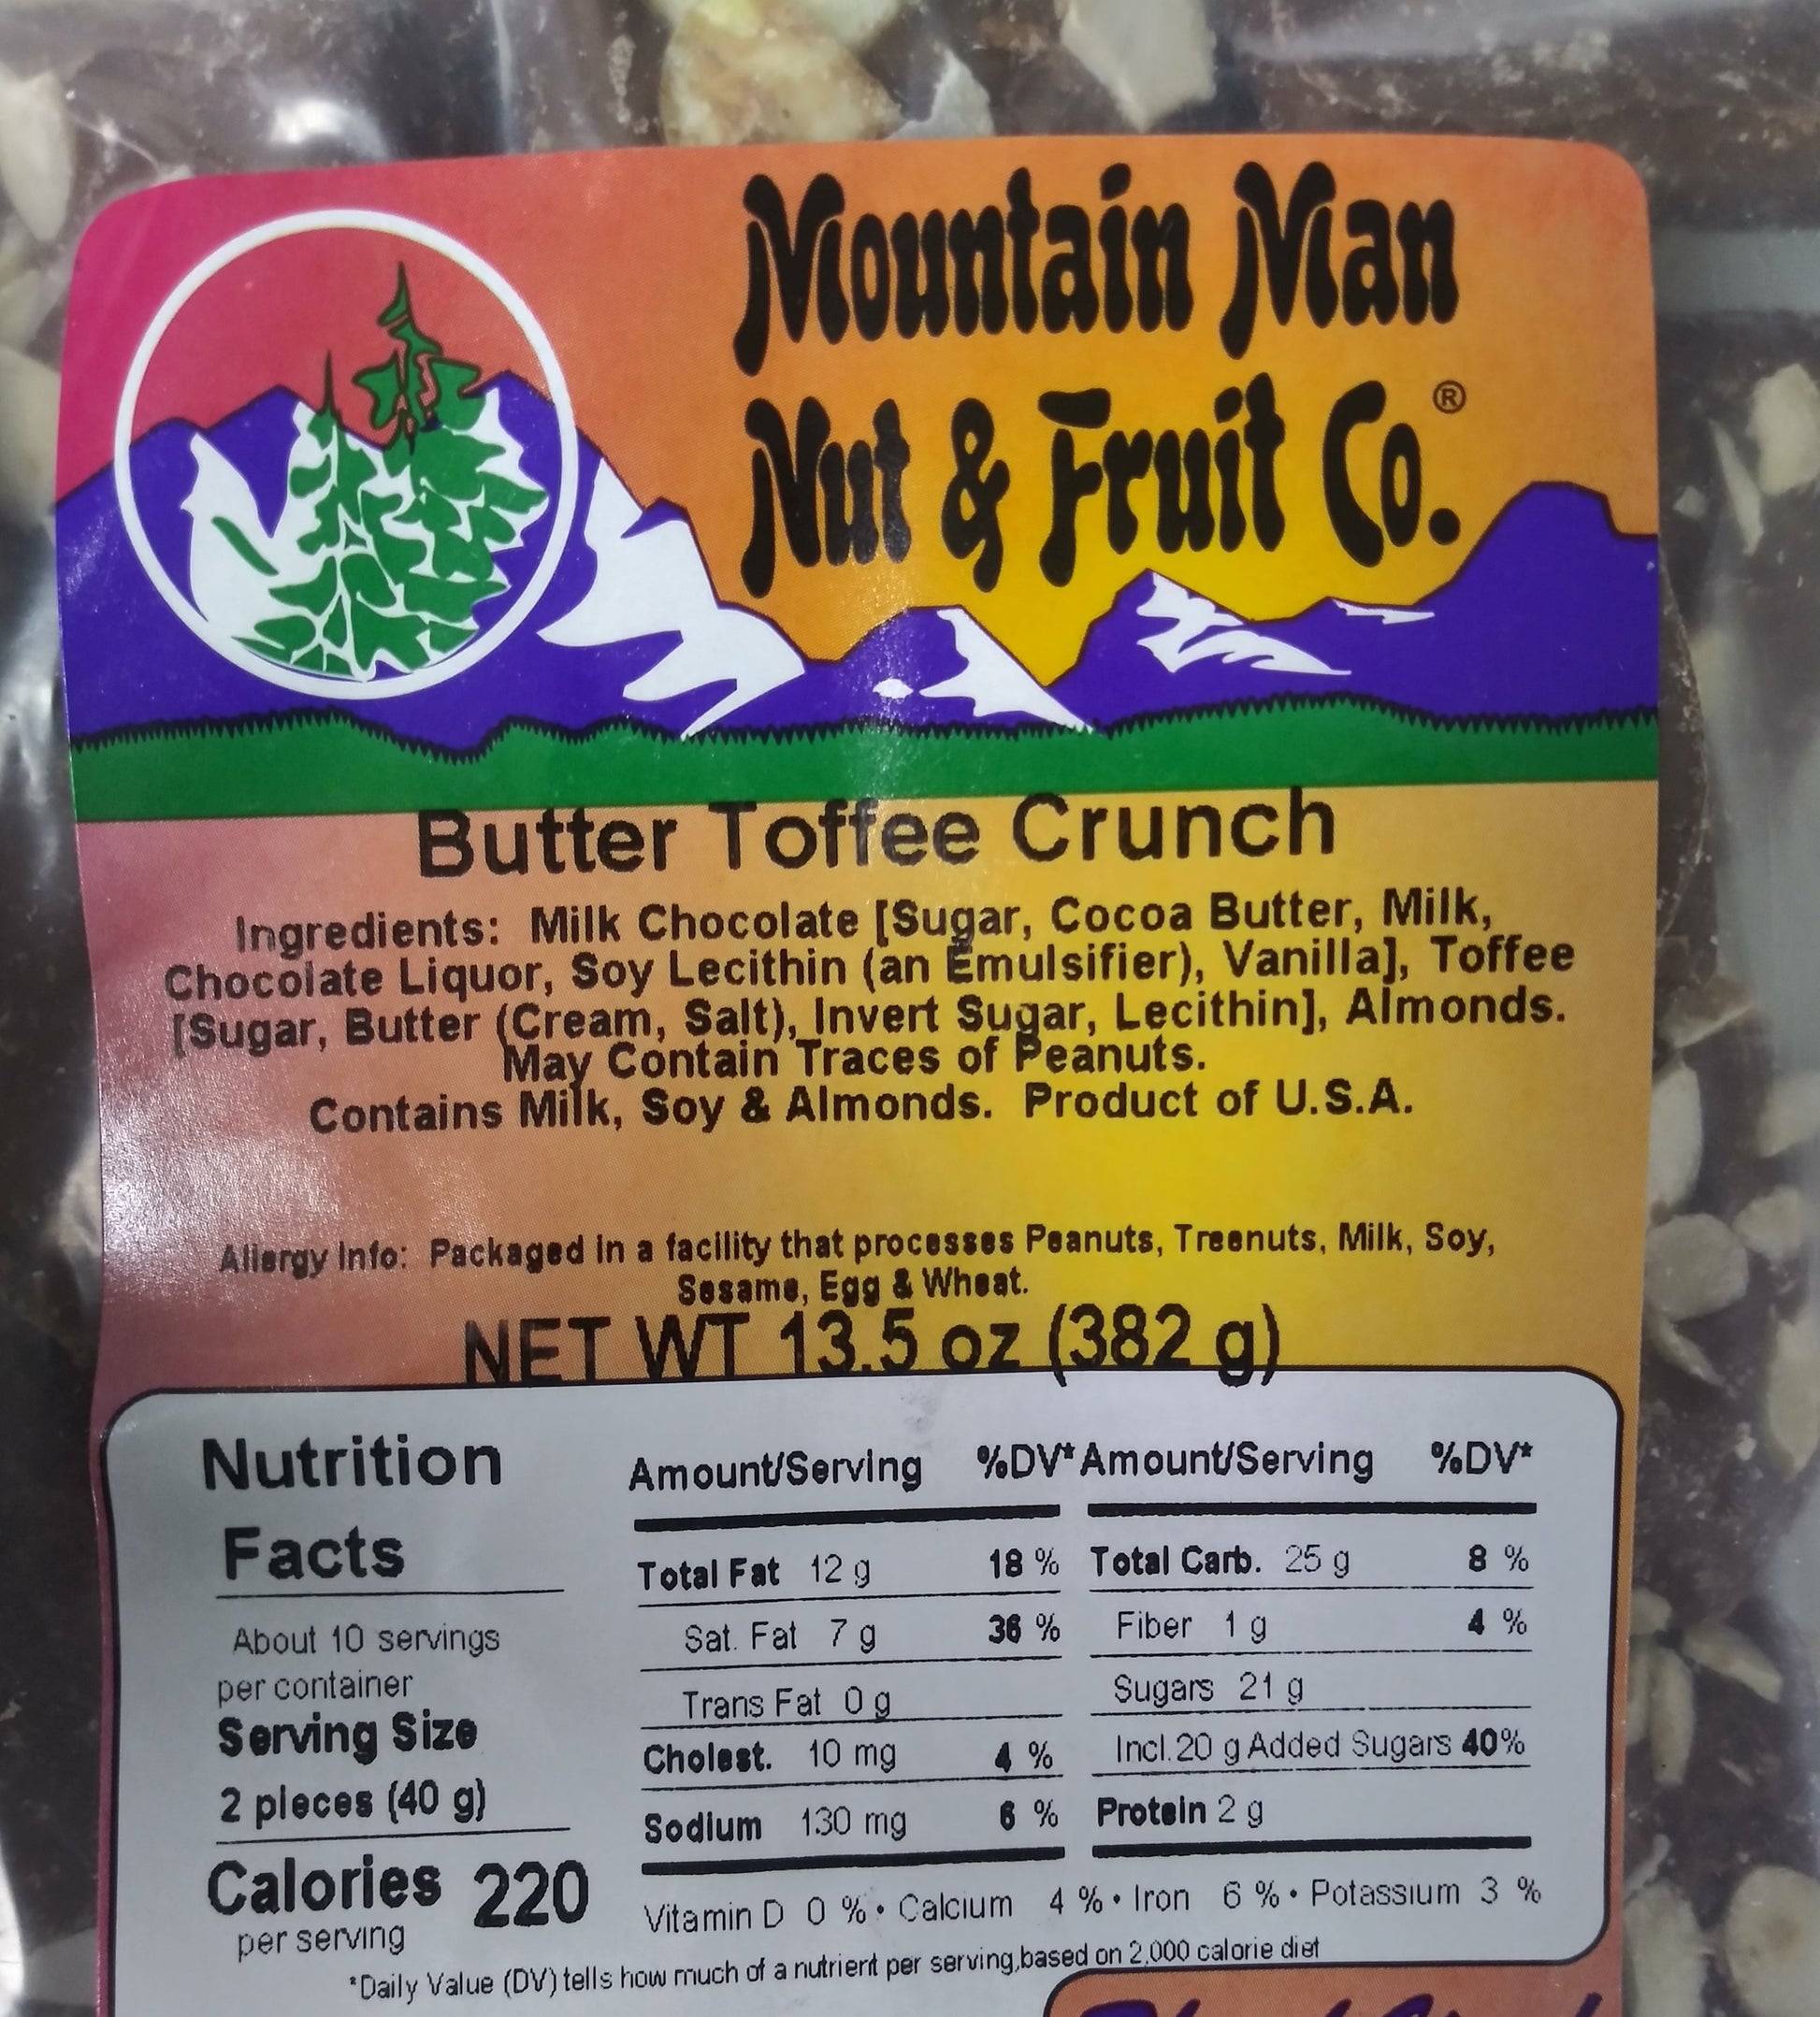 Butter Toffee Crunch 13.5oz Label